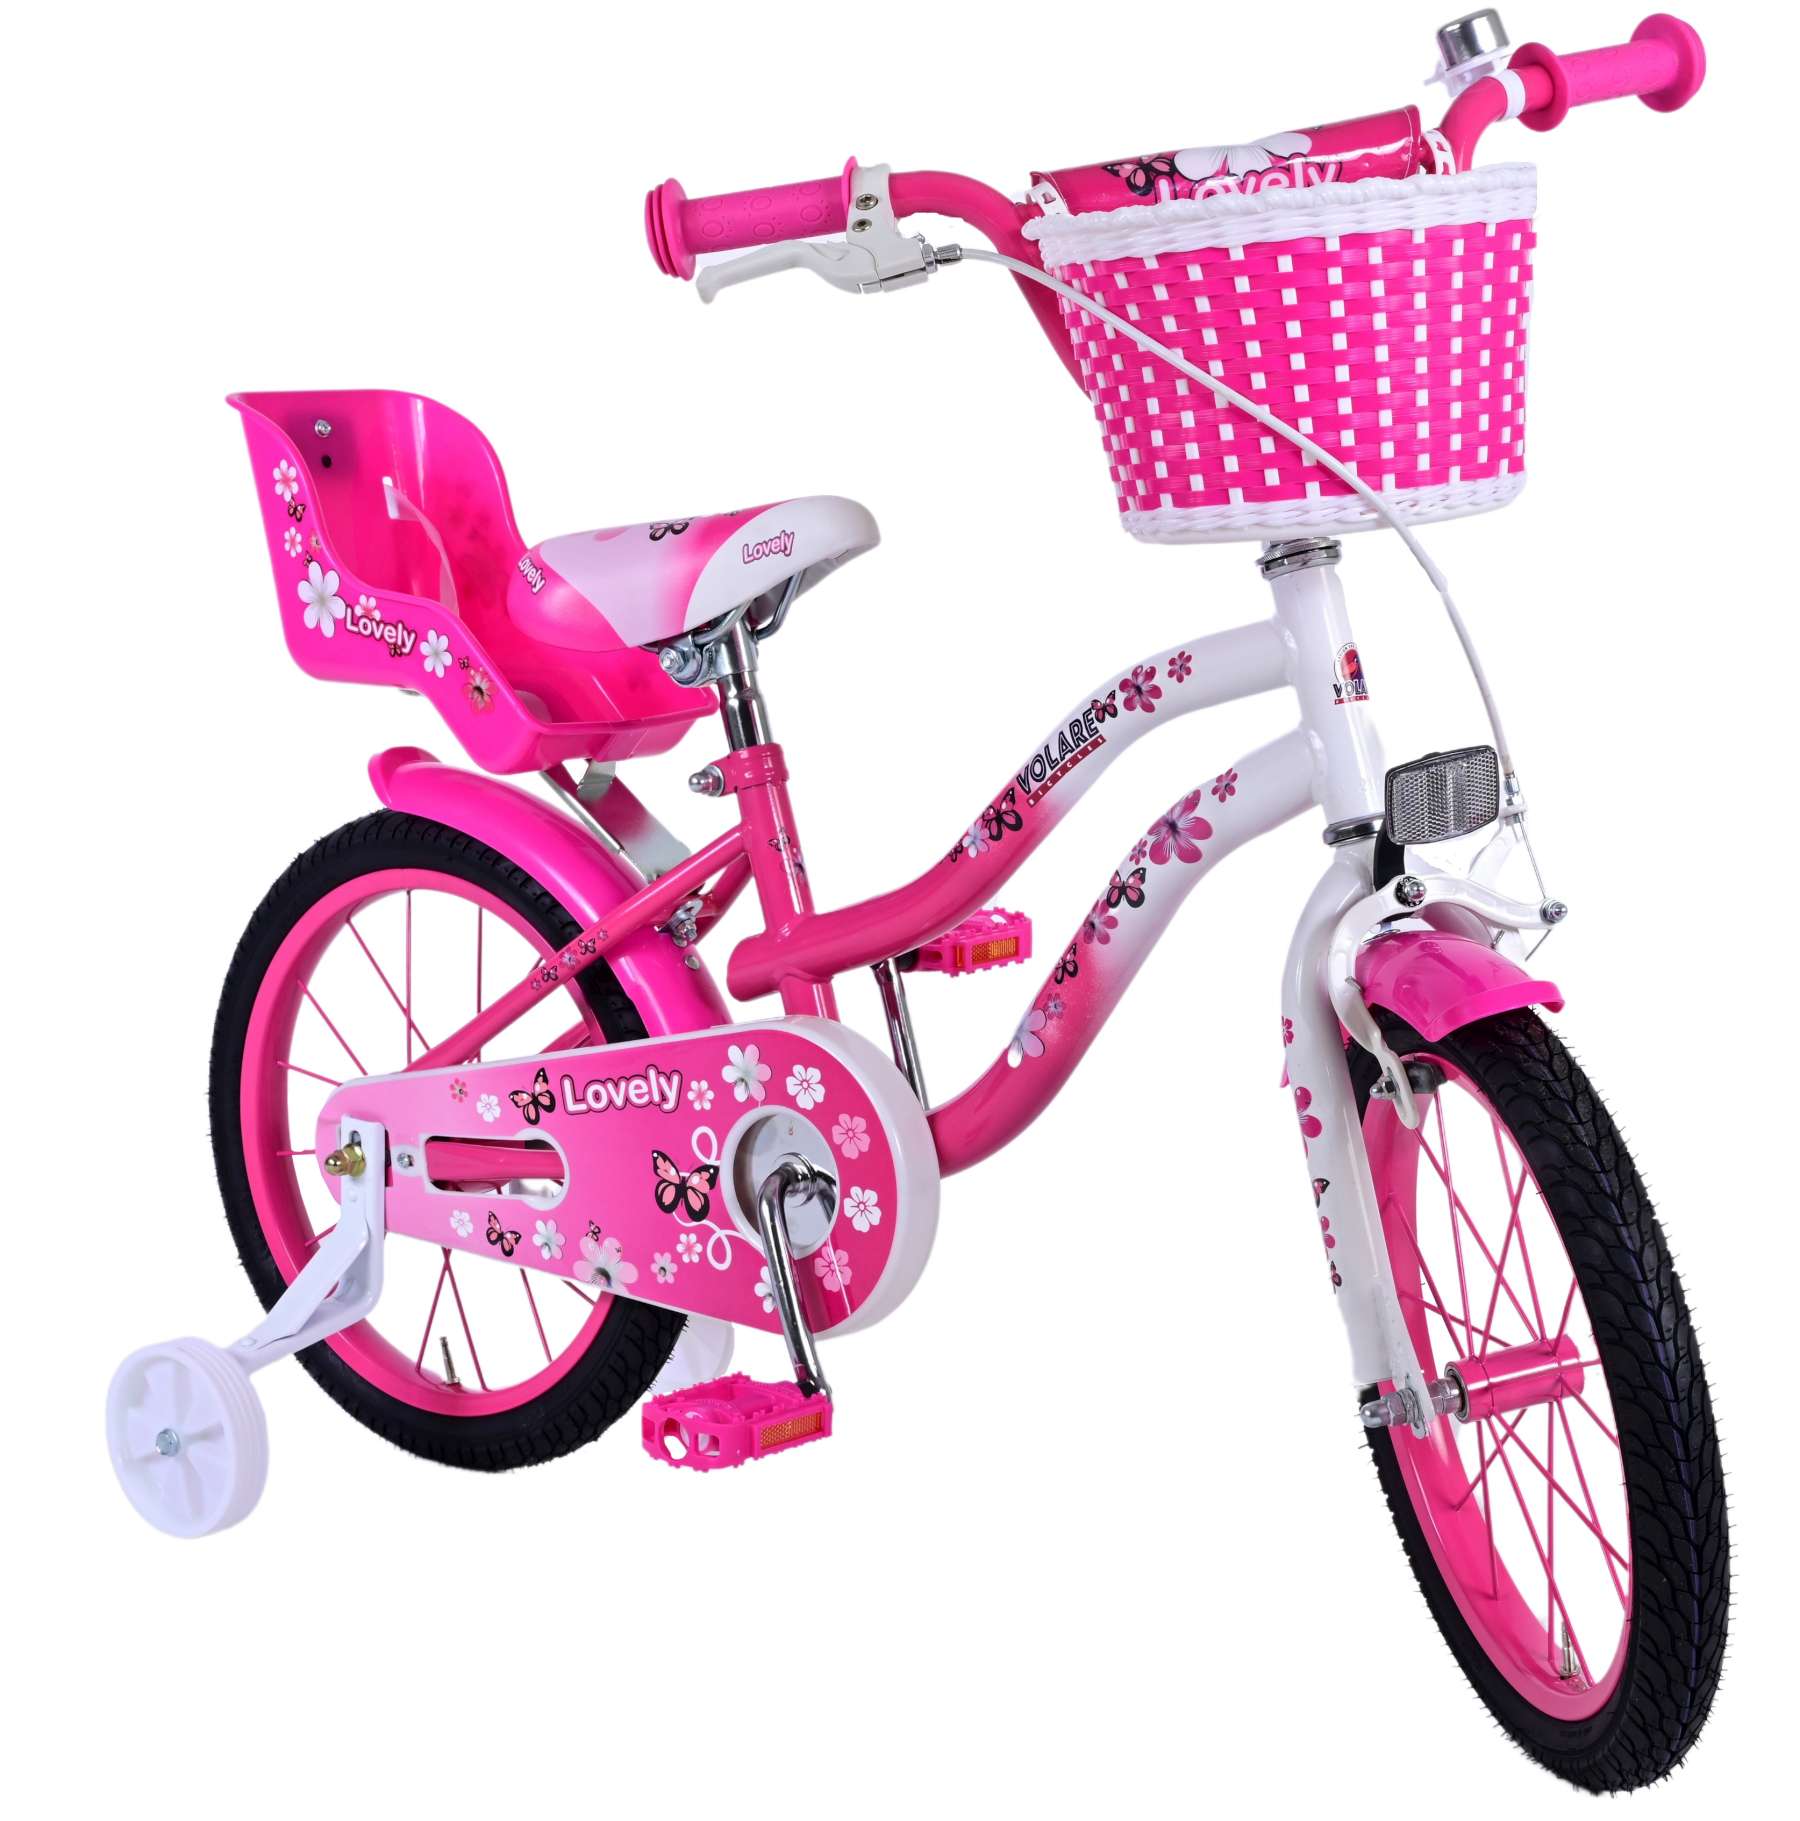 Volare_Lovely_kinderfiets_16_inch_-_6-W1800